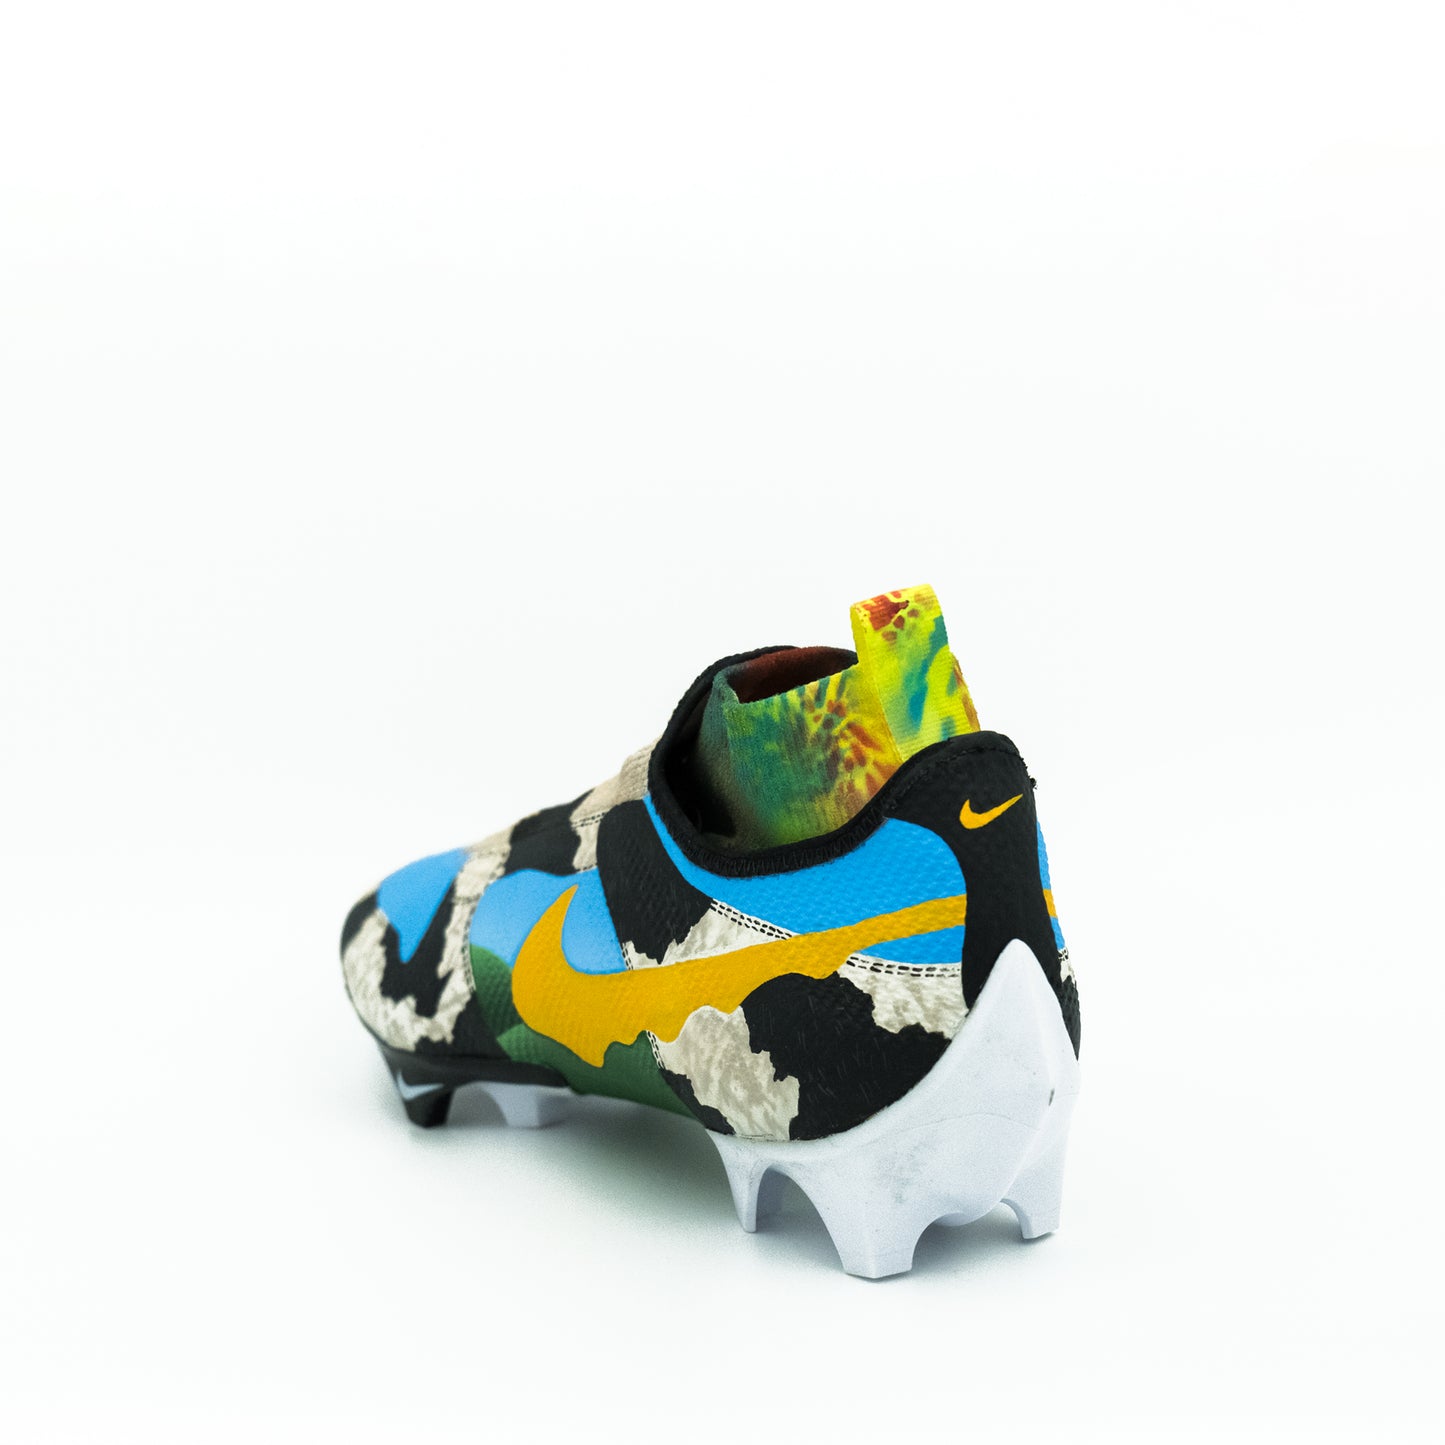 "Chunky Dunky" Cleats [FISK CUSTOMS]